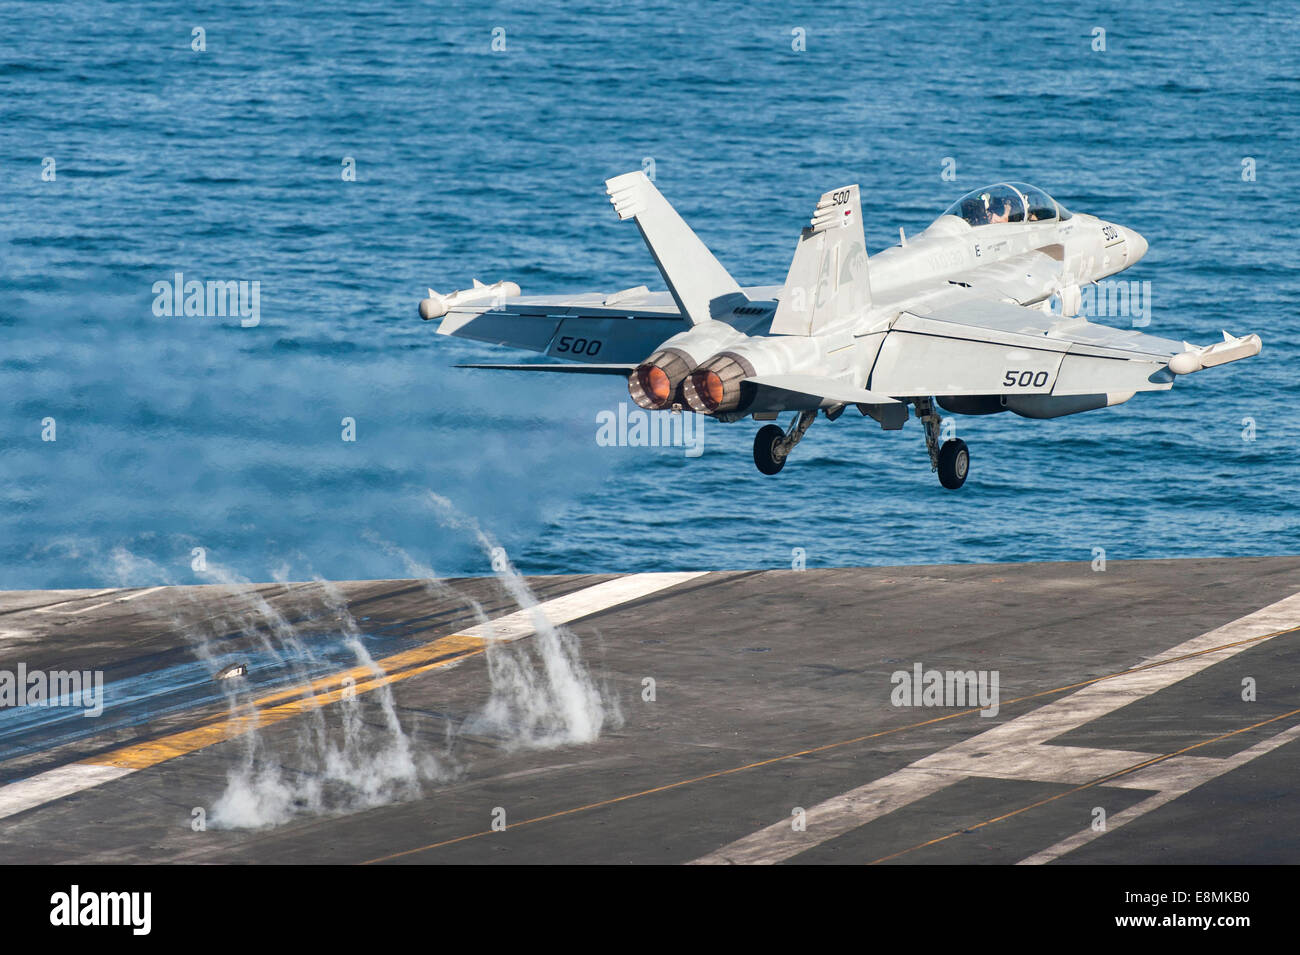 Gulf of Oman, March 19, 2014 - An EA-18G Growler launches from the flight deck of the aircraft carrier USS Harry S. Truman (CVN Stock Photo